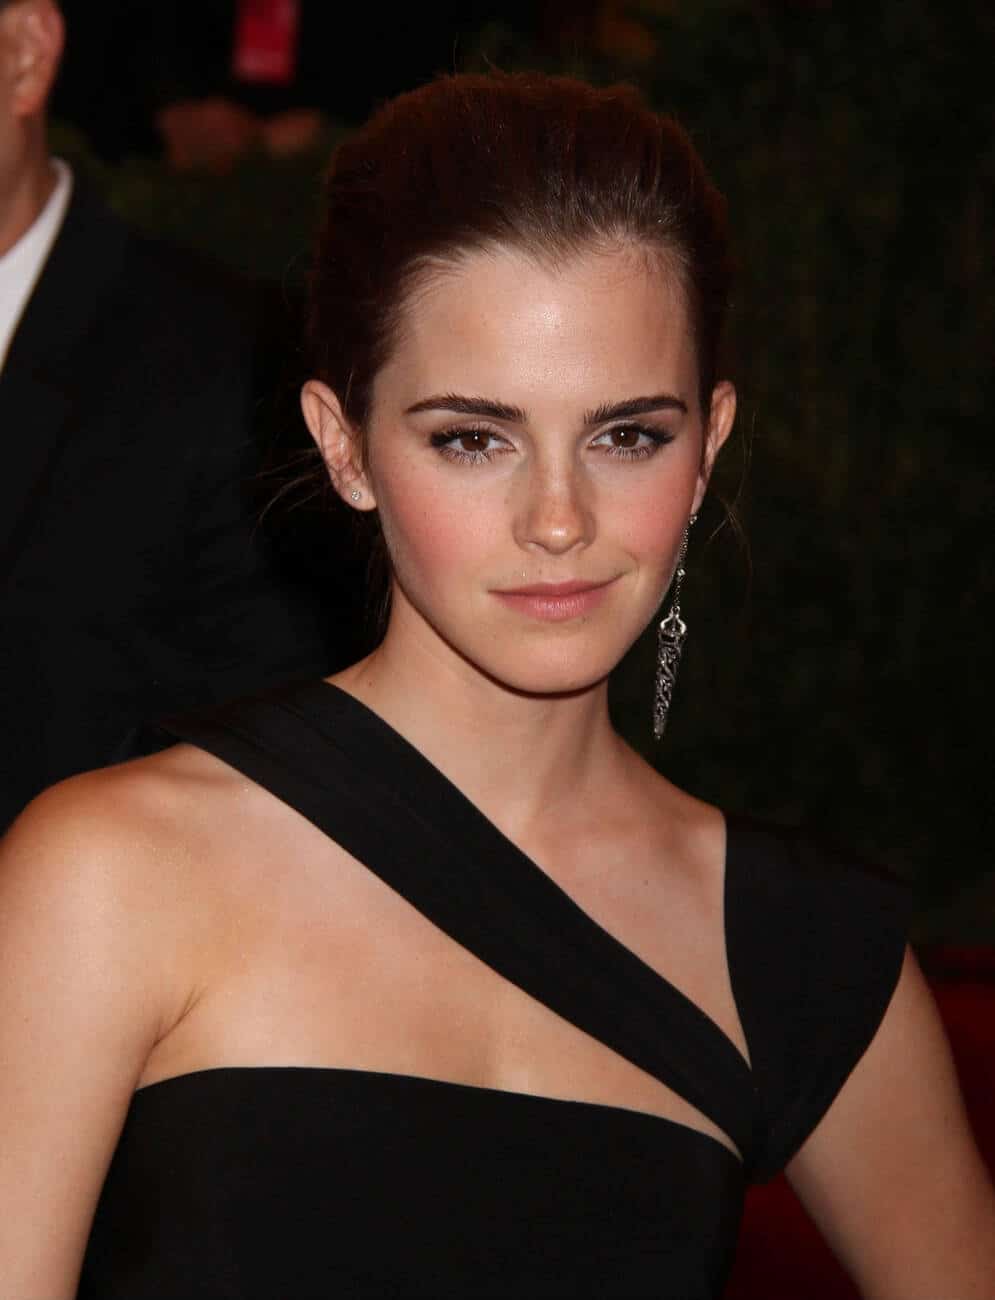 Emma Watson Wore a Daring Black Asymmetrical Dress at the Met Gala in NY